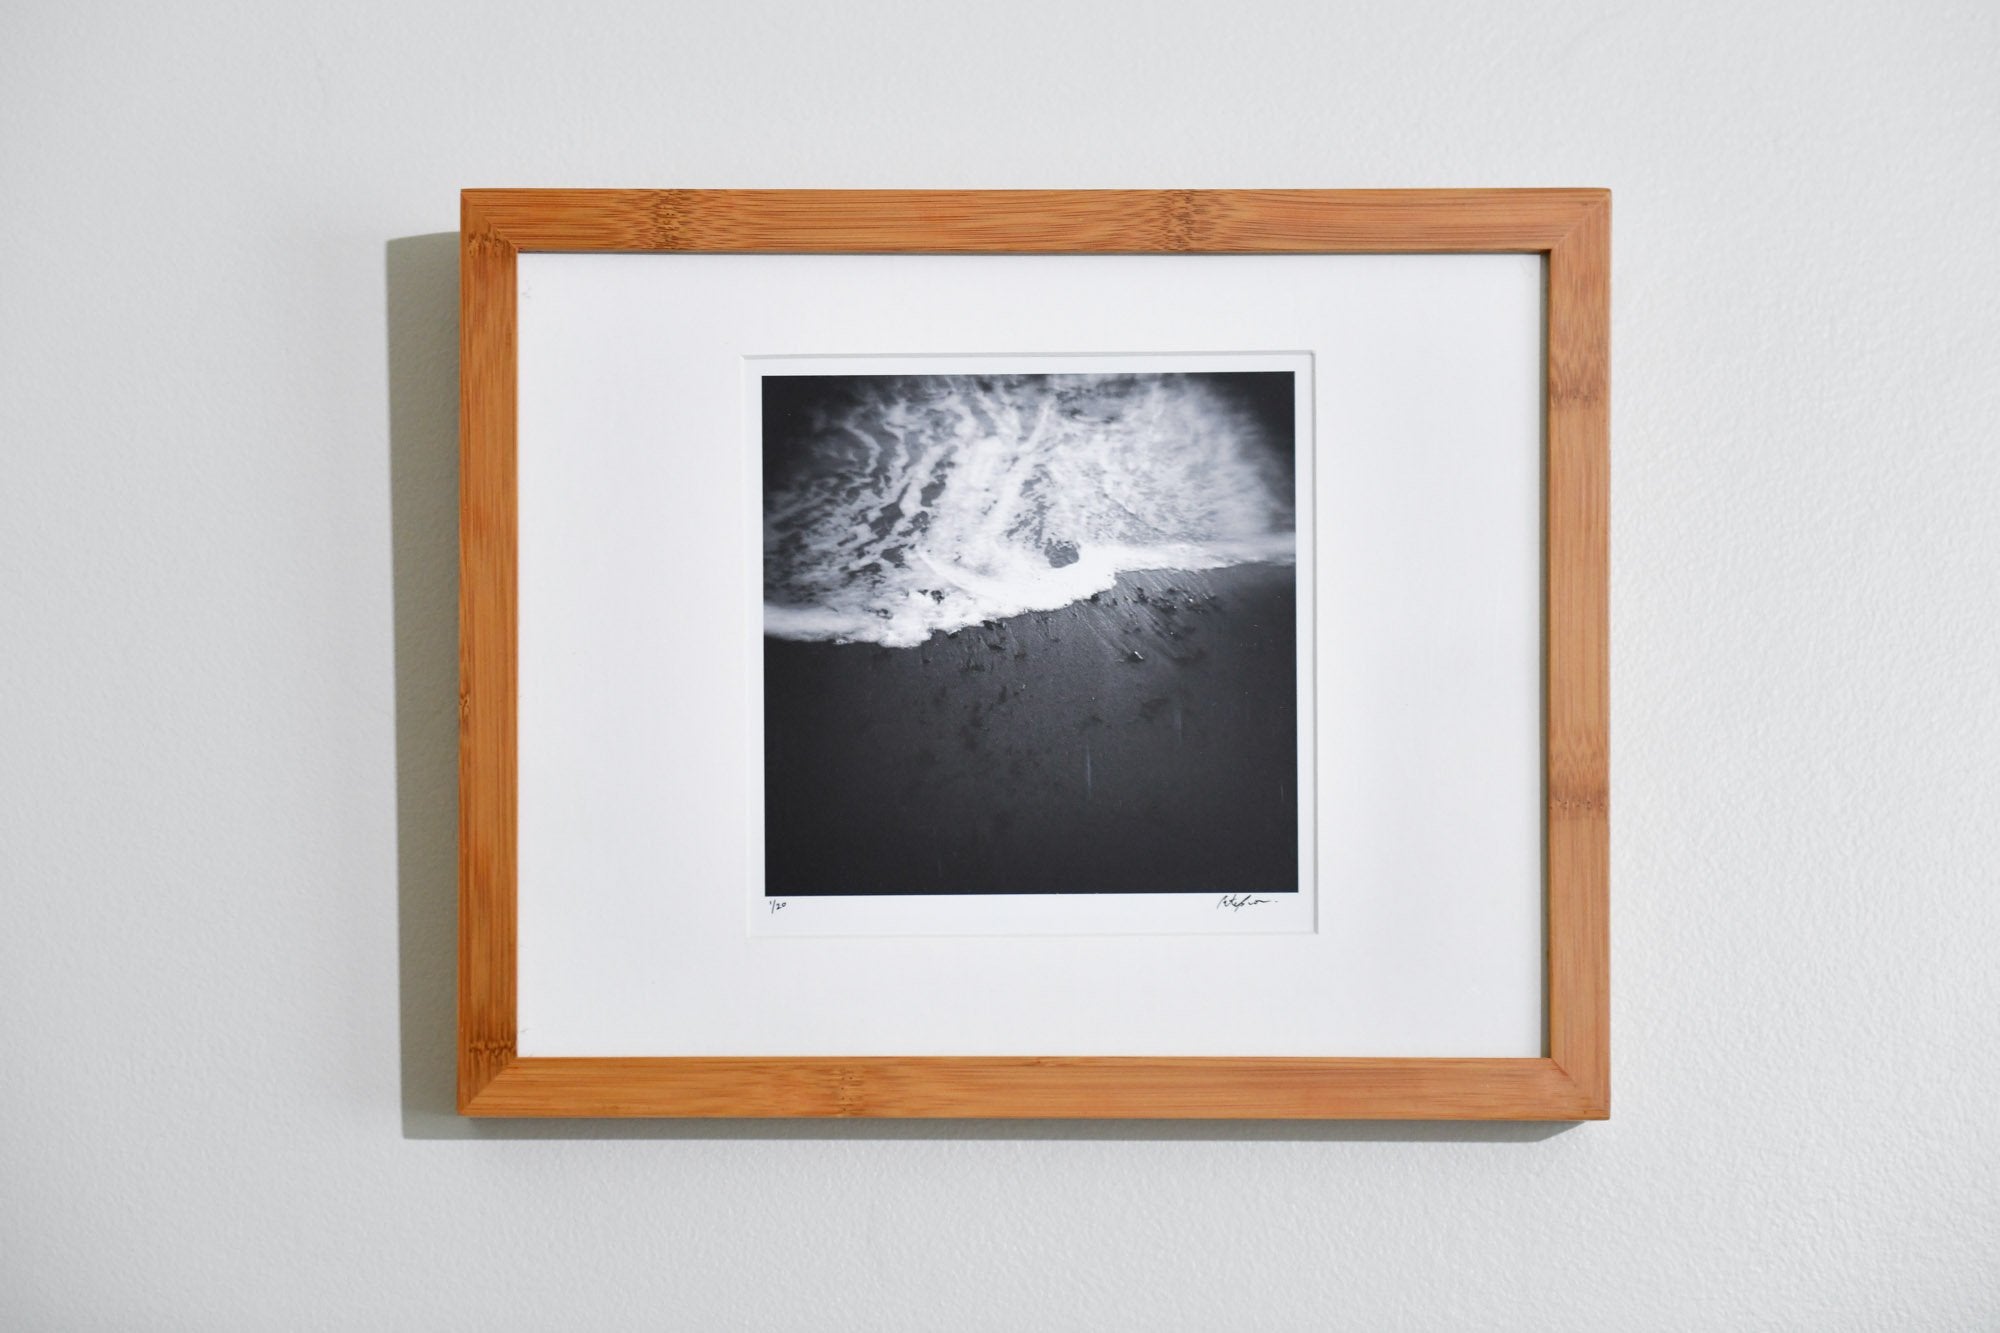 Cate Brown Photo Foam Edge // Framed Fine Art 11x14" // Limited Edition 1 of 20 Available Inventory Ocean Fine Art